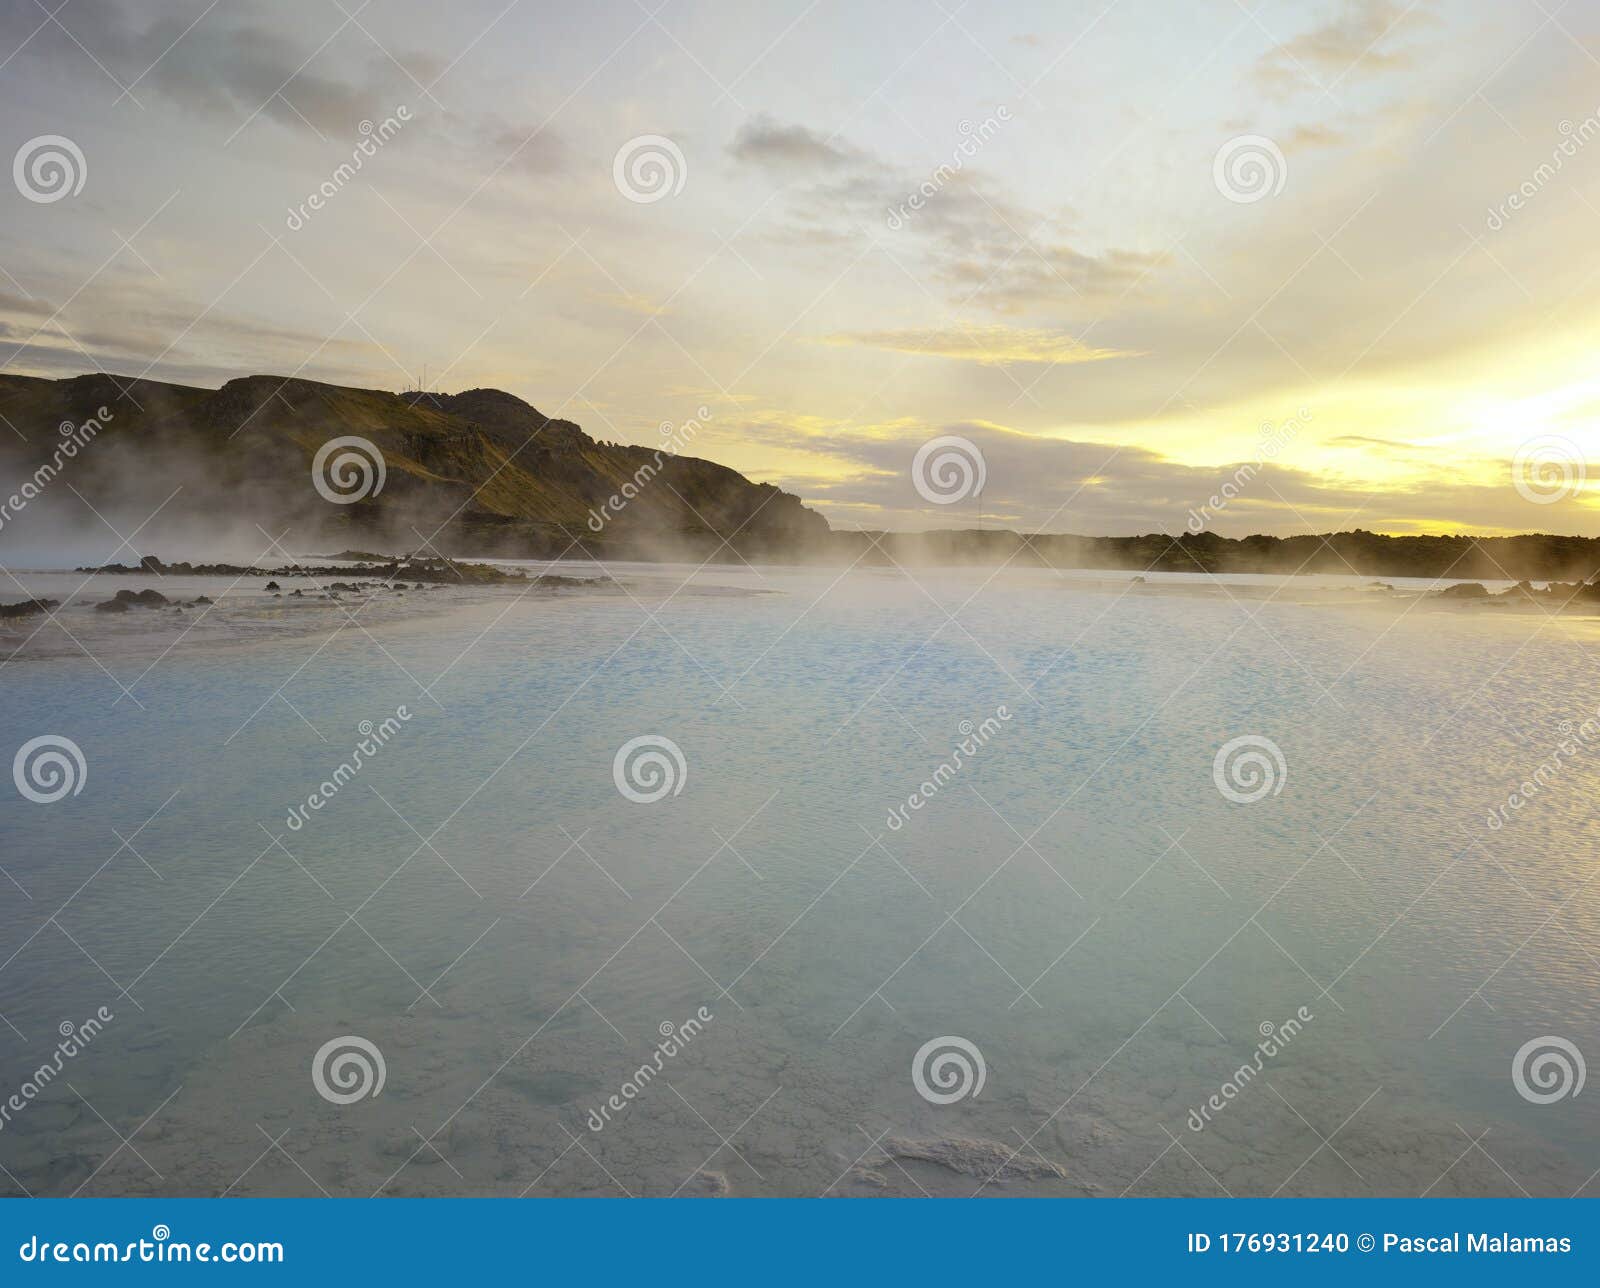 beautiful landscape of blue lagoon thermal bath in iceland with steam in a cold atmosphere in sunset with a dramatic sky